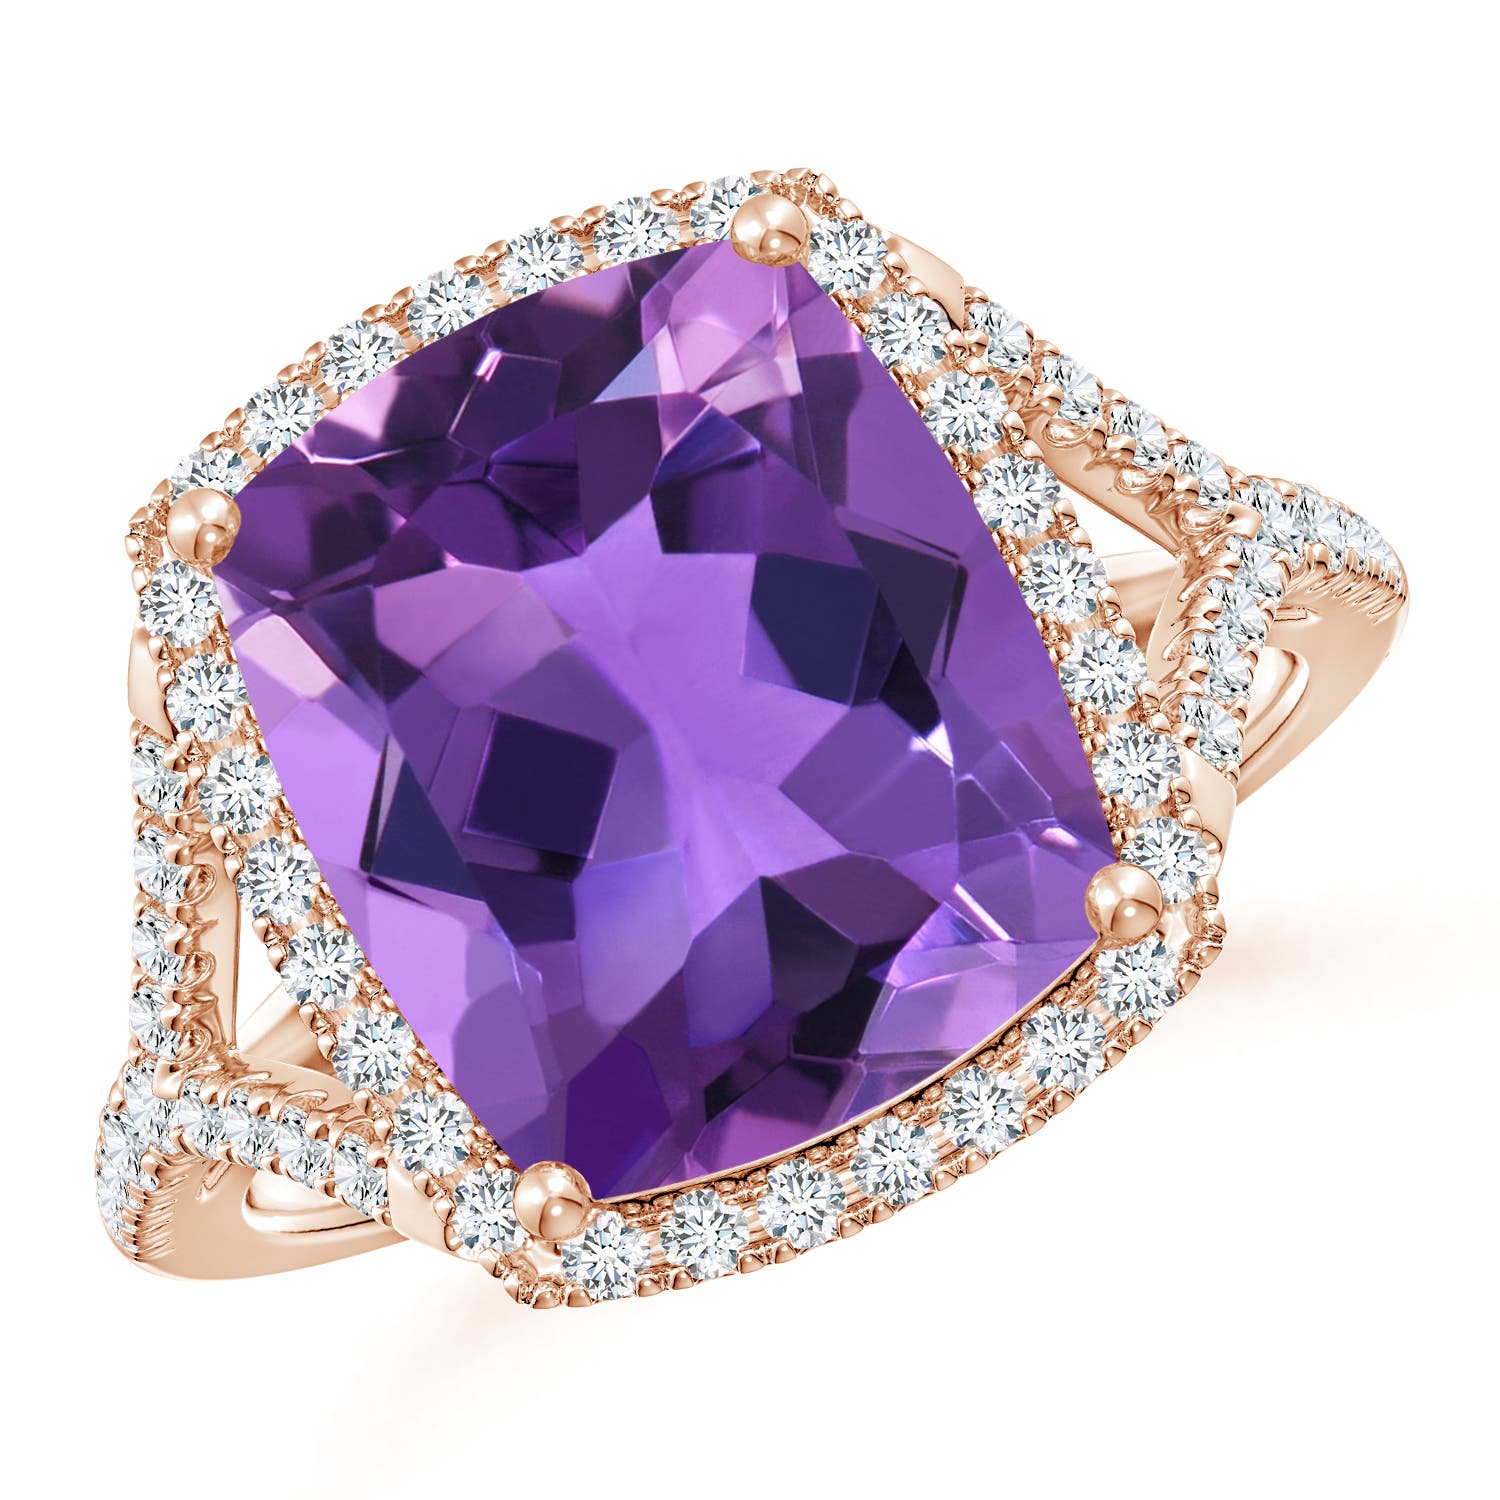 AAA - Amethyst / 5.07 CT / 14 KT Rose Gold